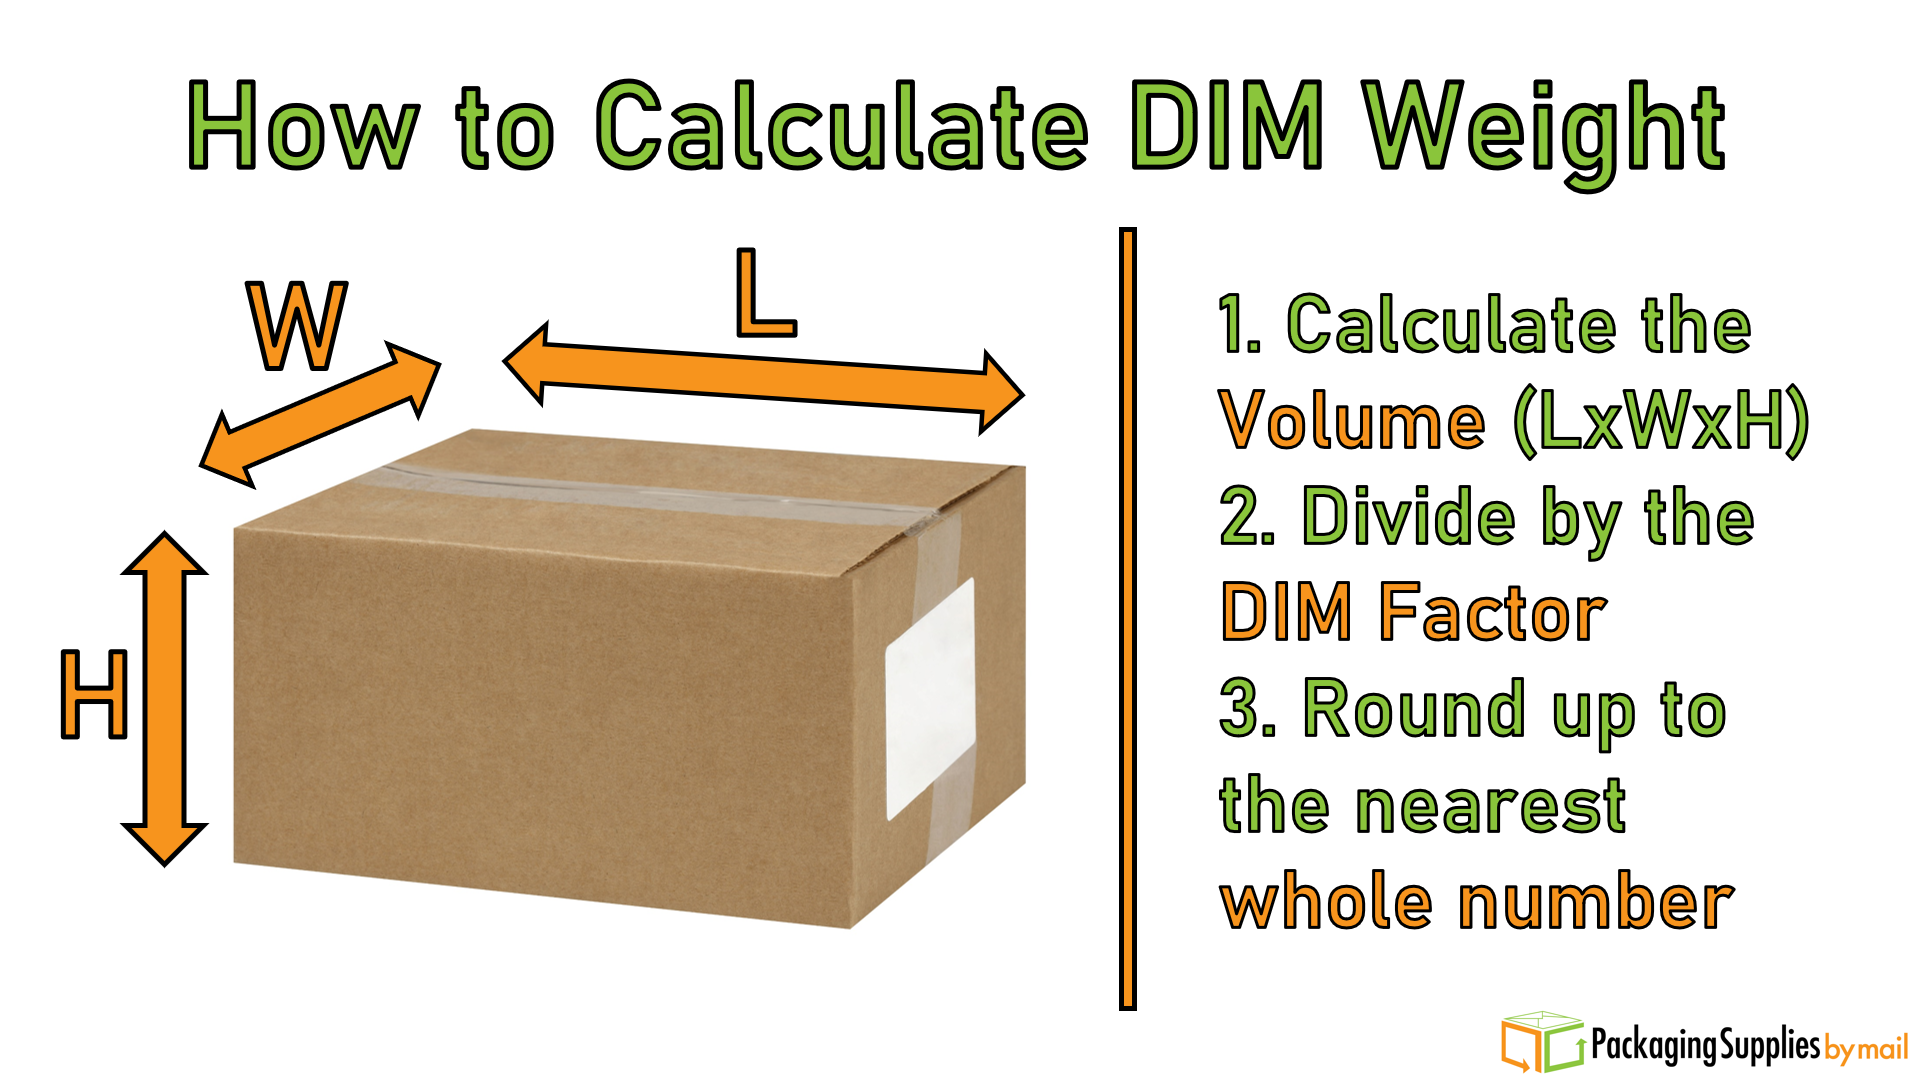 How to calculate DIM weight.